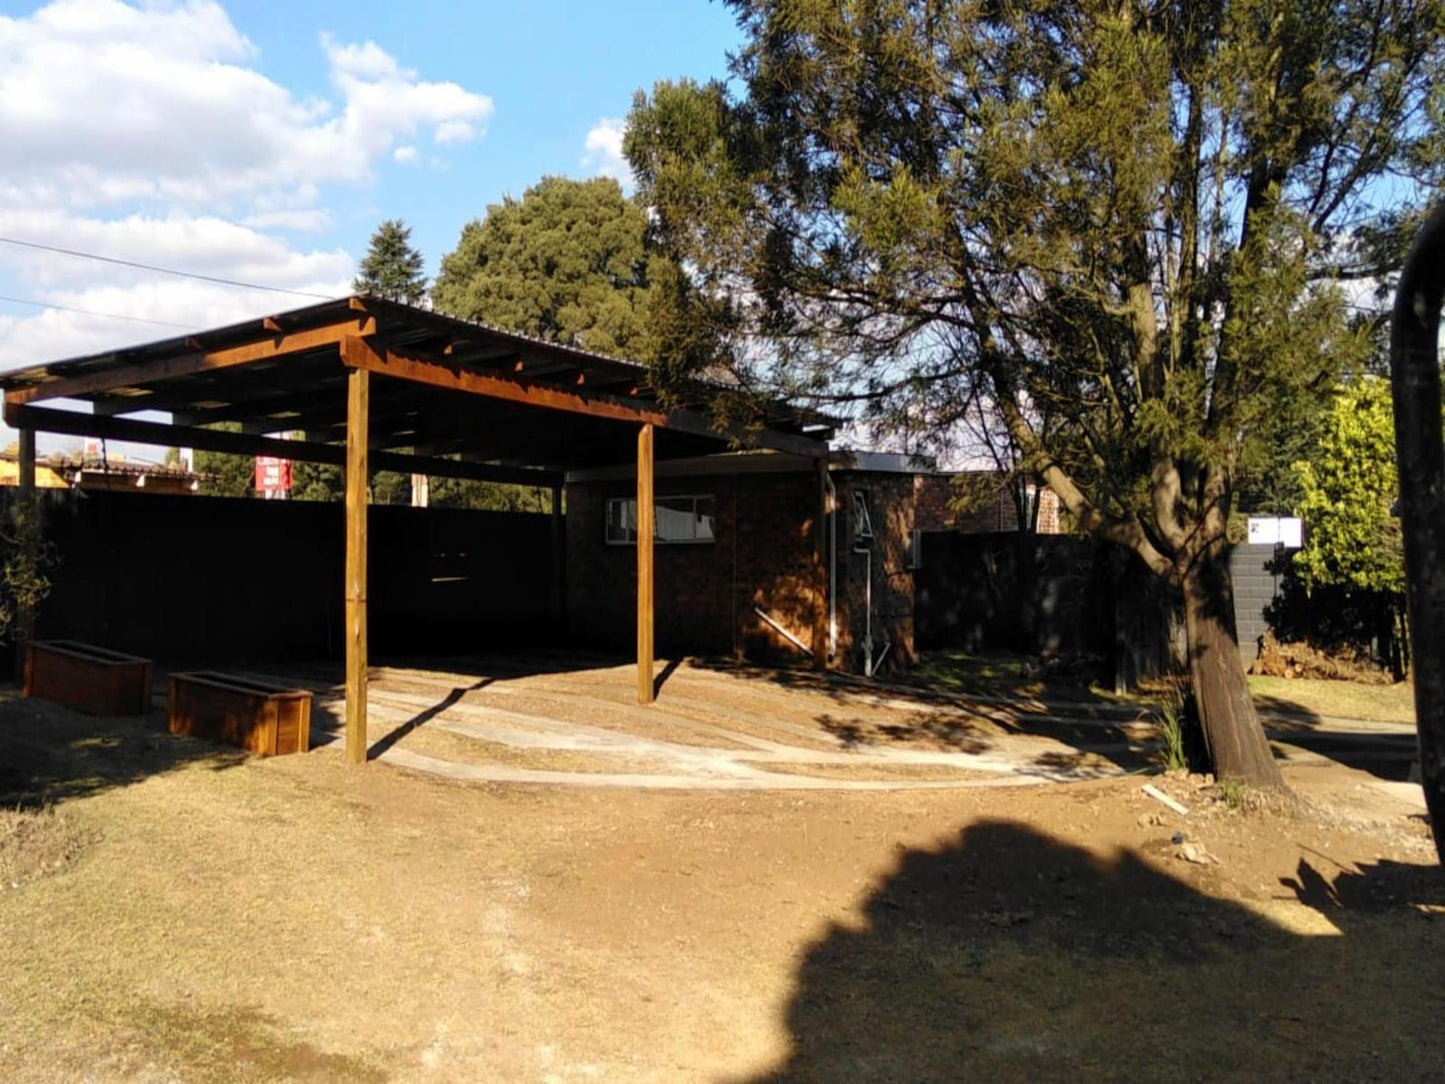 Omnabella Guest House Belfast Mpumalanga South Africa Cabin, Building, Architecture